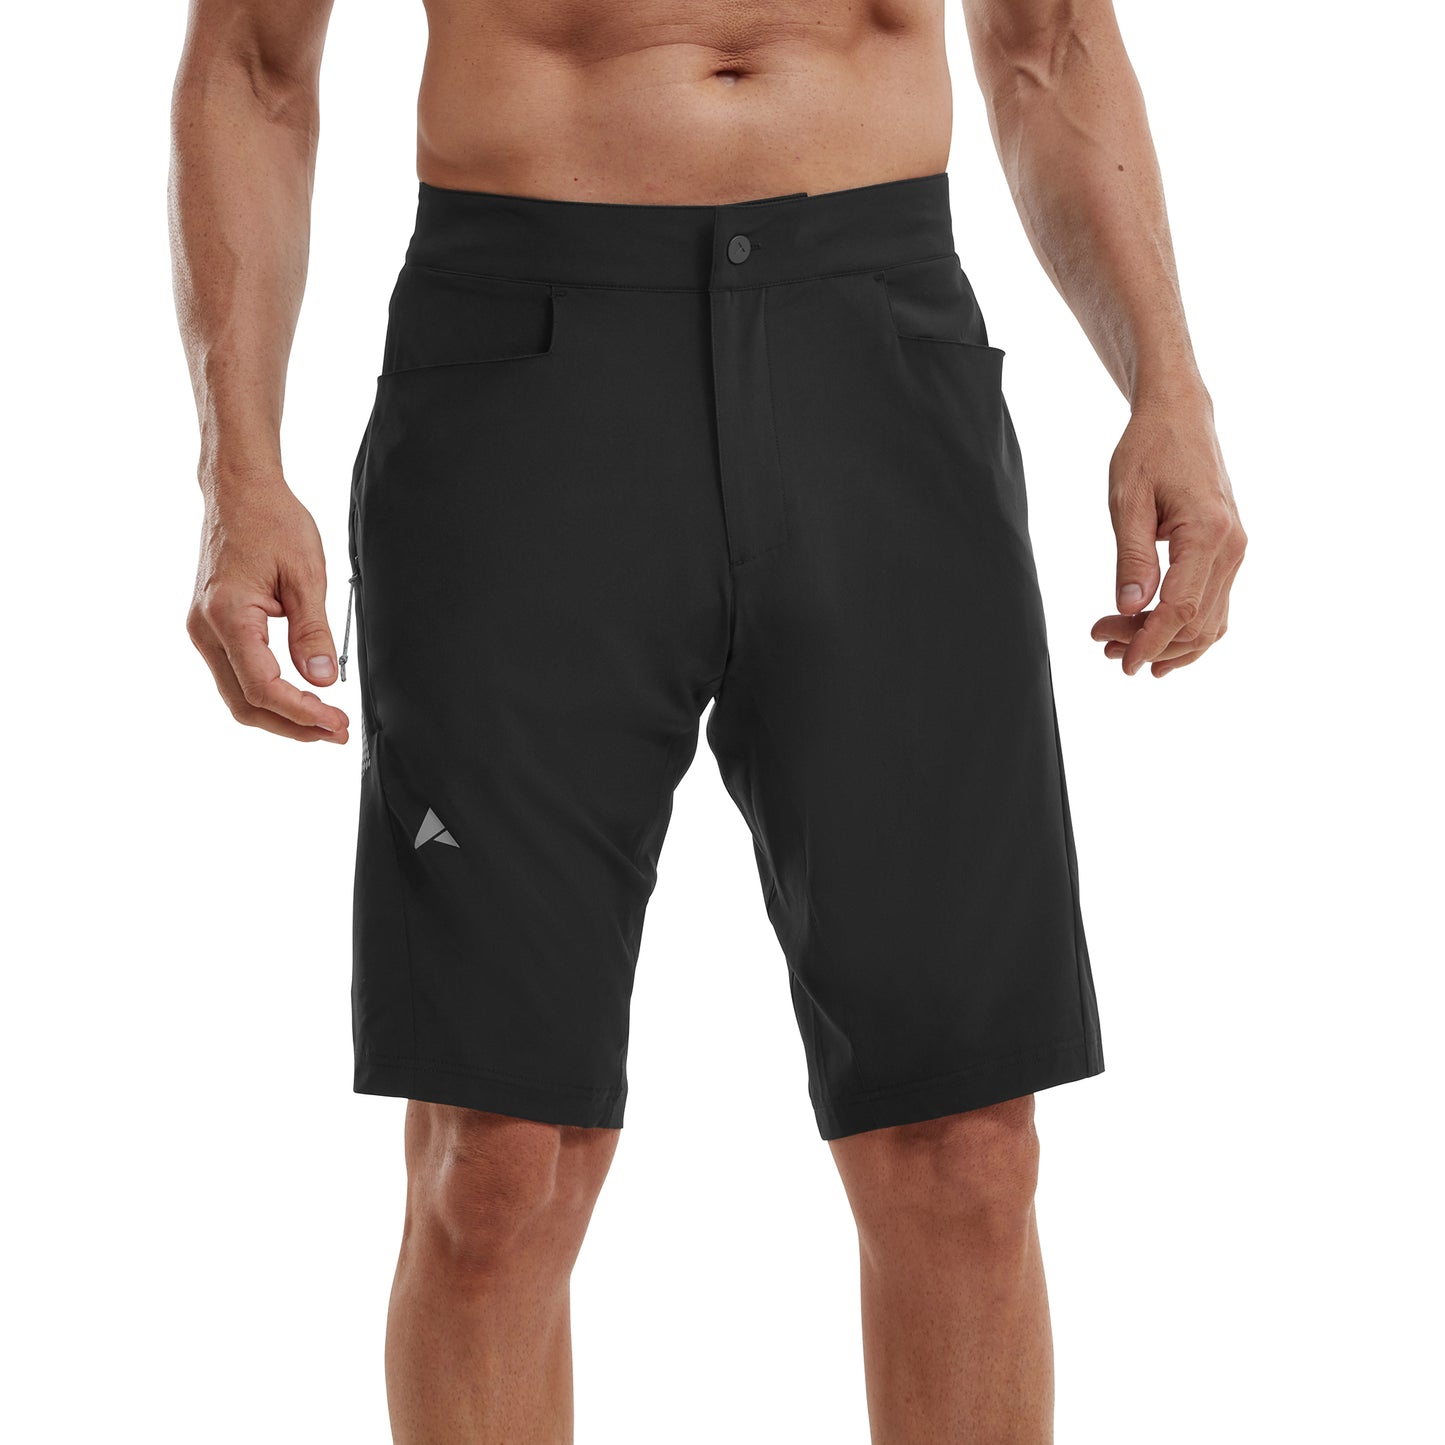 ALTURA NIGHTVISION MEN'S LightWEIGHT CYCLING SHORTS